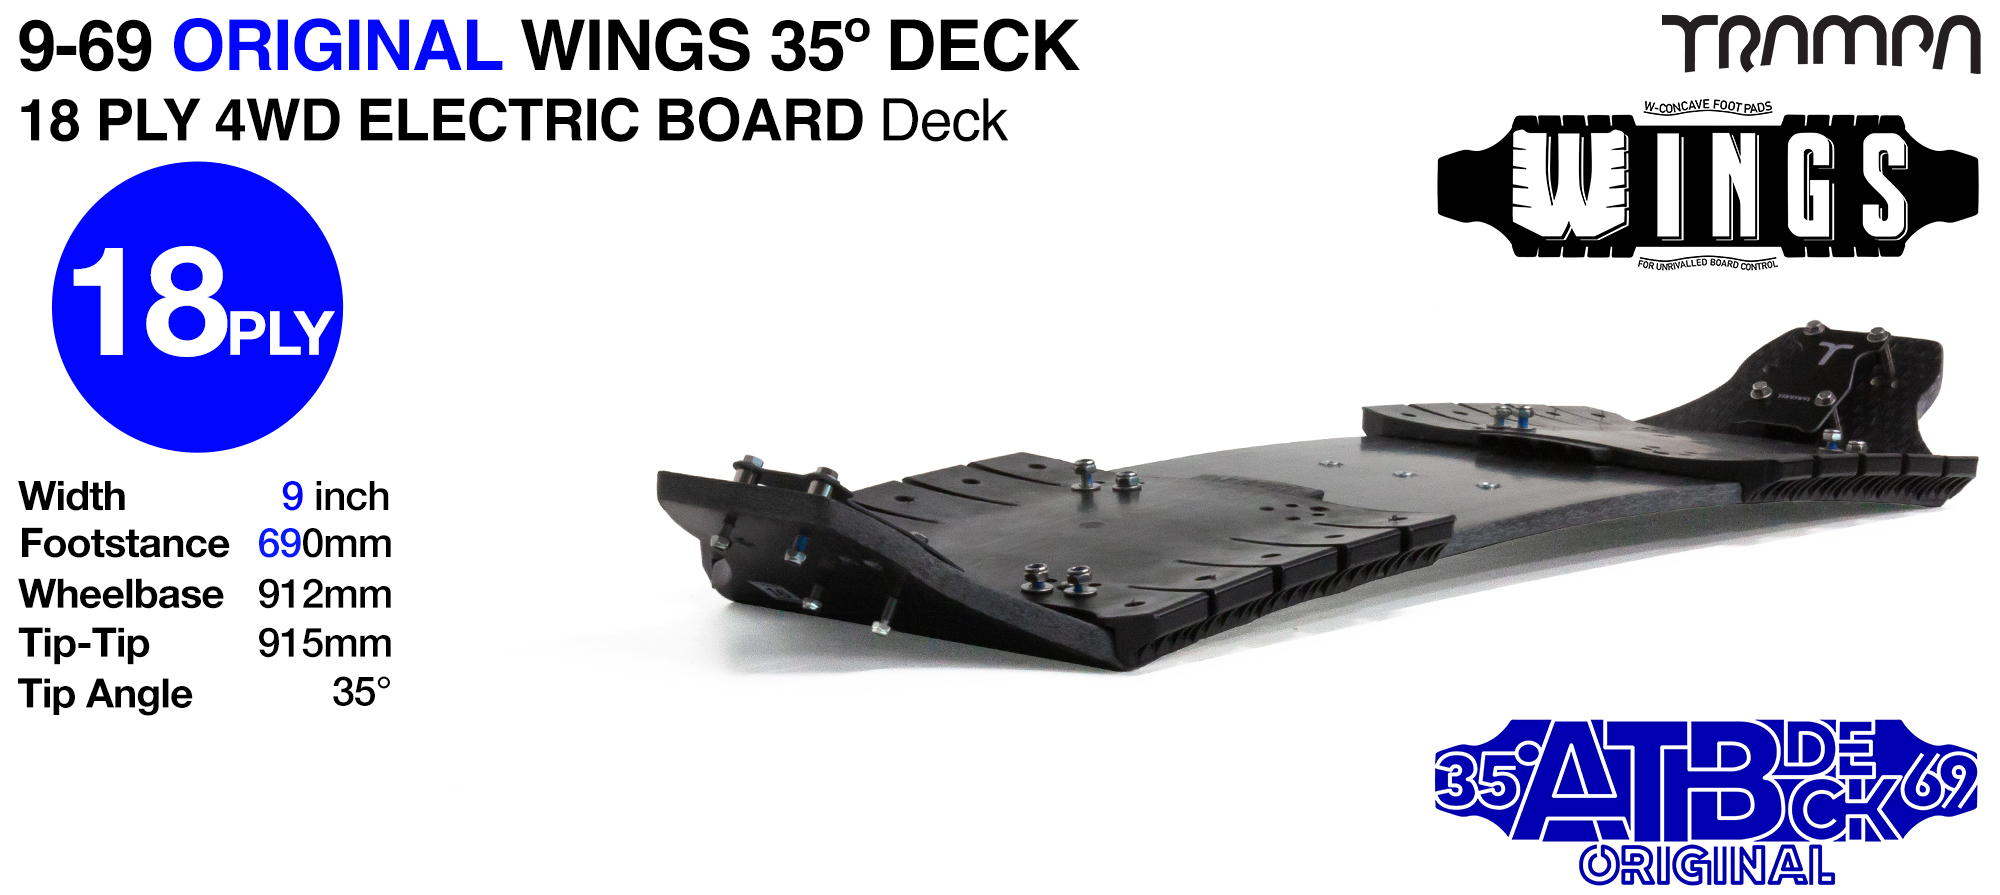 TRAMPA 35° 9/69 4WD Mountainboard Deck with WINGS - WINGS give safe cable routing, add W Shaped concave & the increase the width of the deck from 9 to 10 Inches - 18ply 